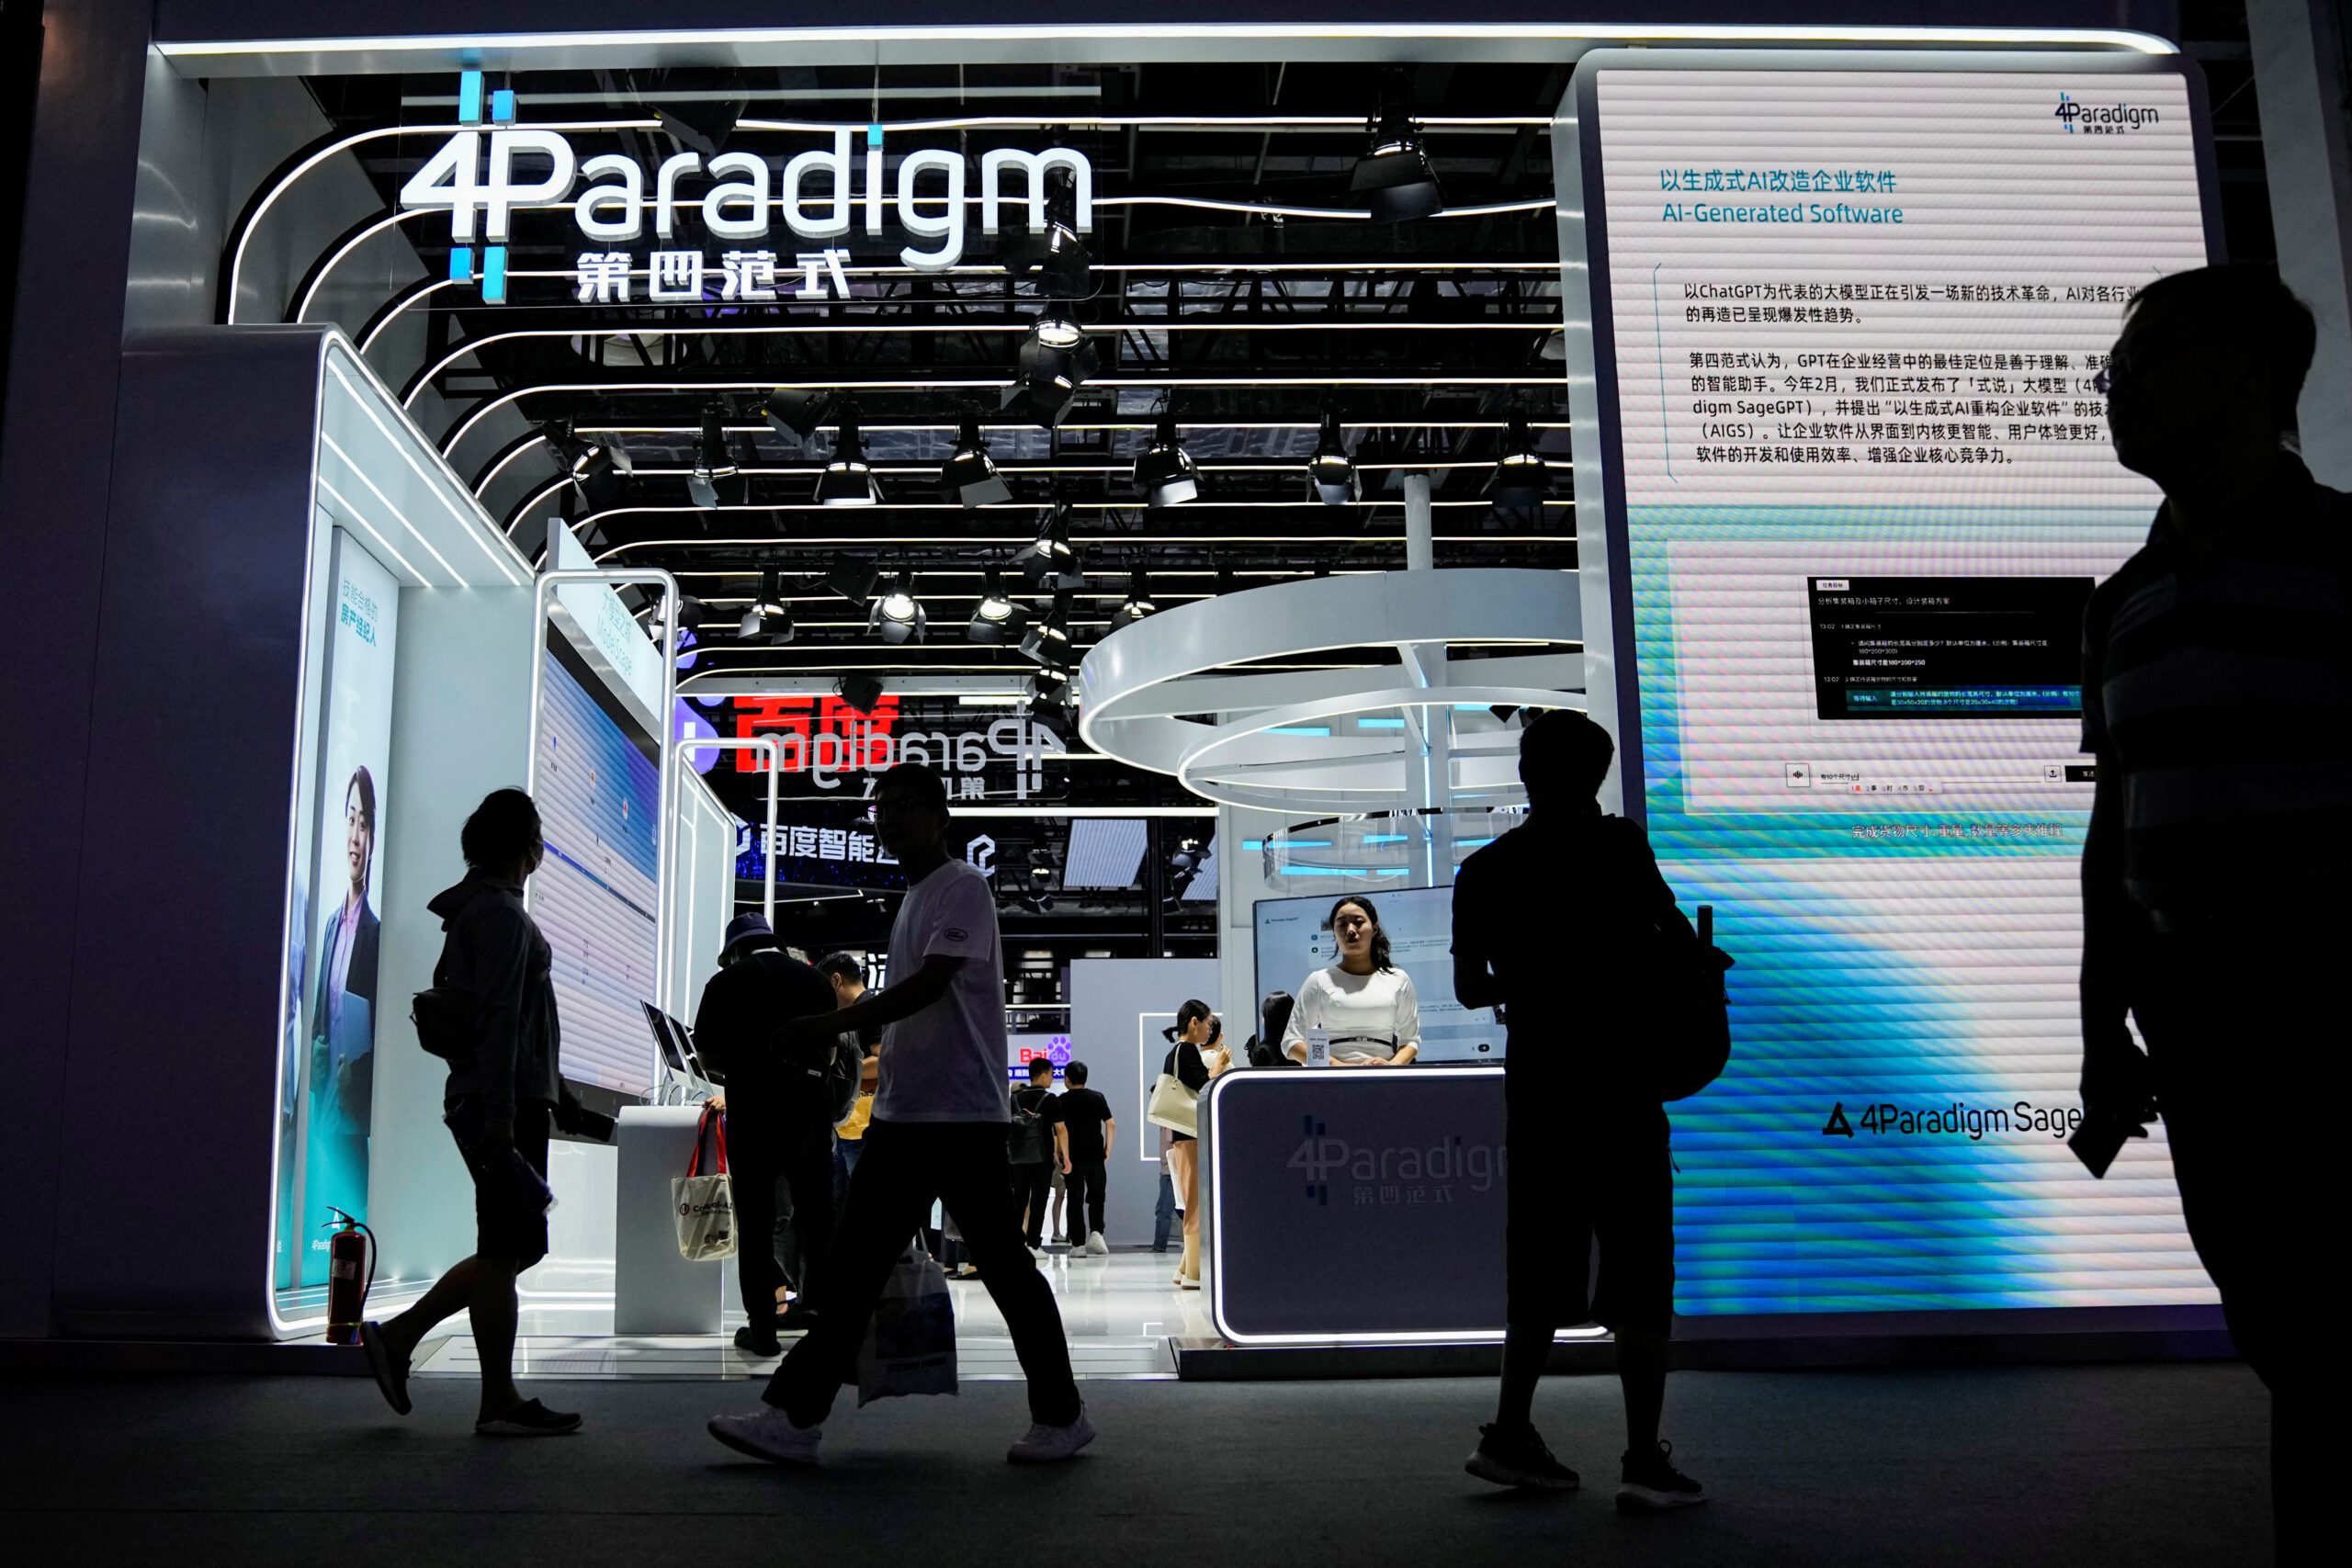 Chinese AI firm Fourth Paradigm leads HK IPO surge to raise $280m